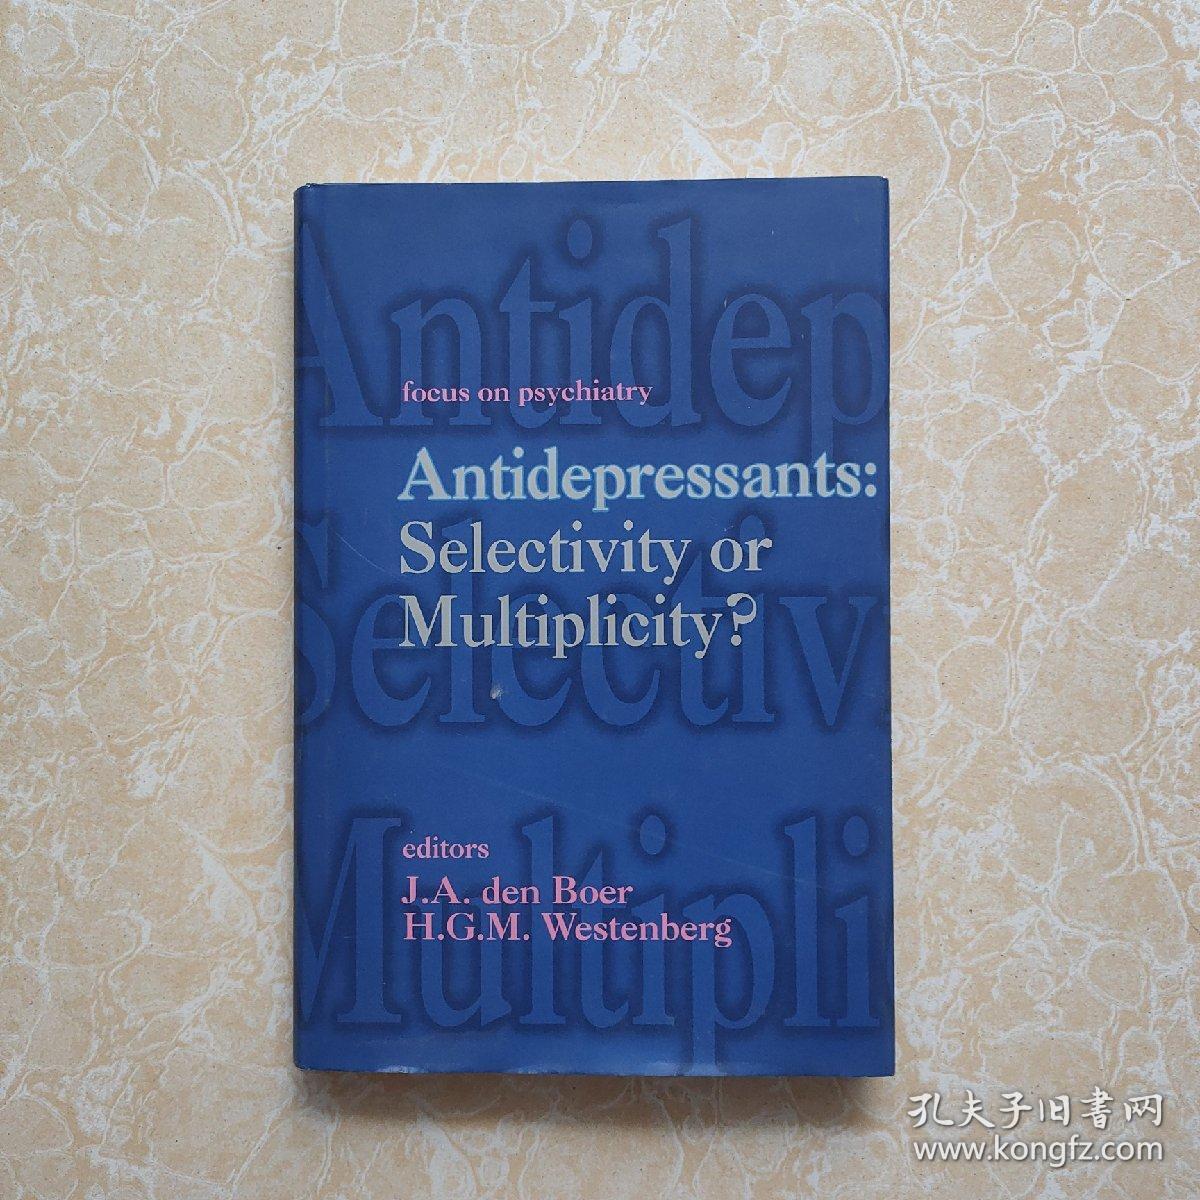 Antidepressants:Selectivity or Multiplicity